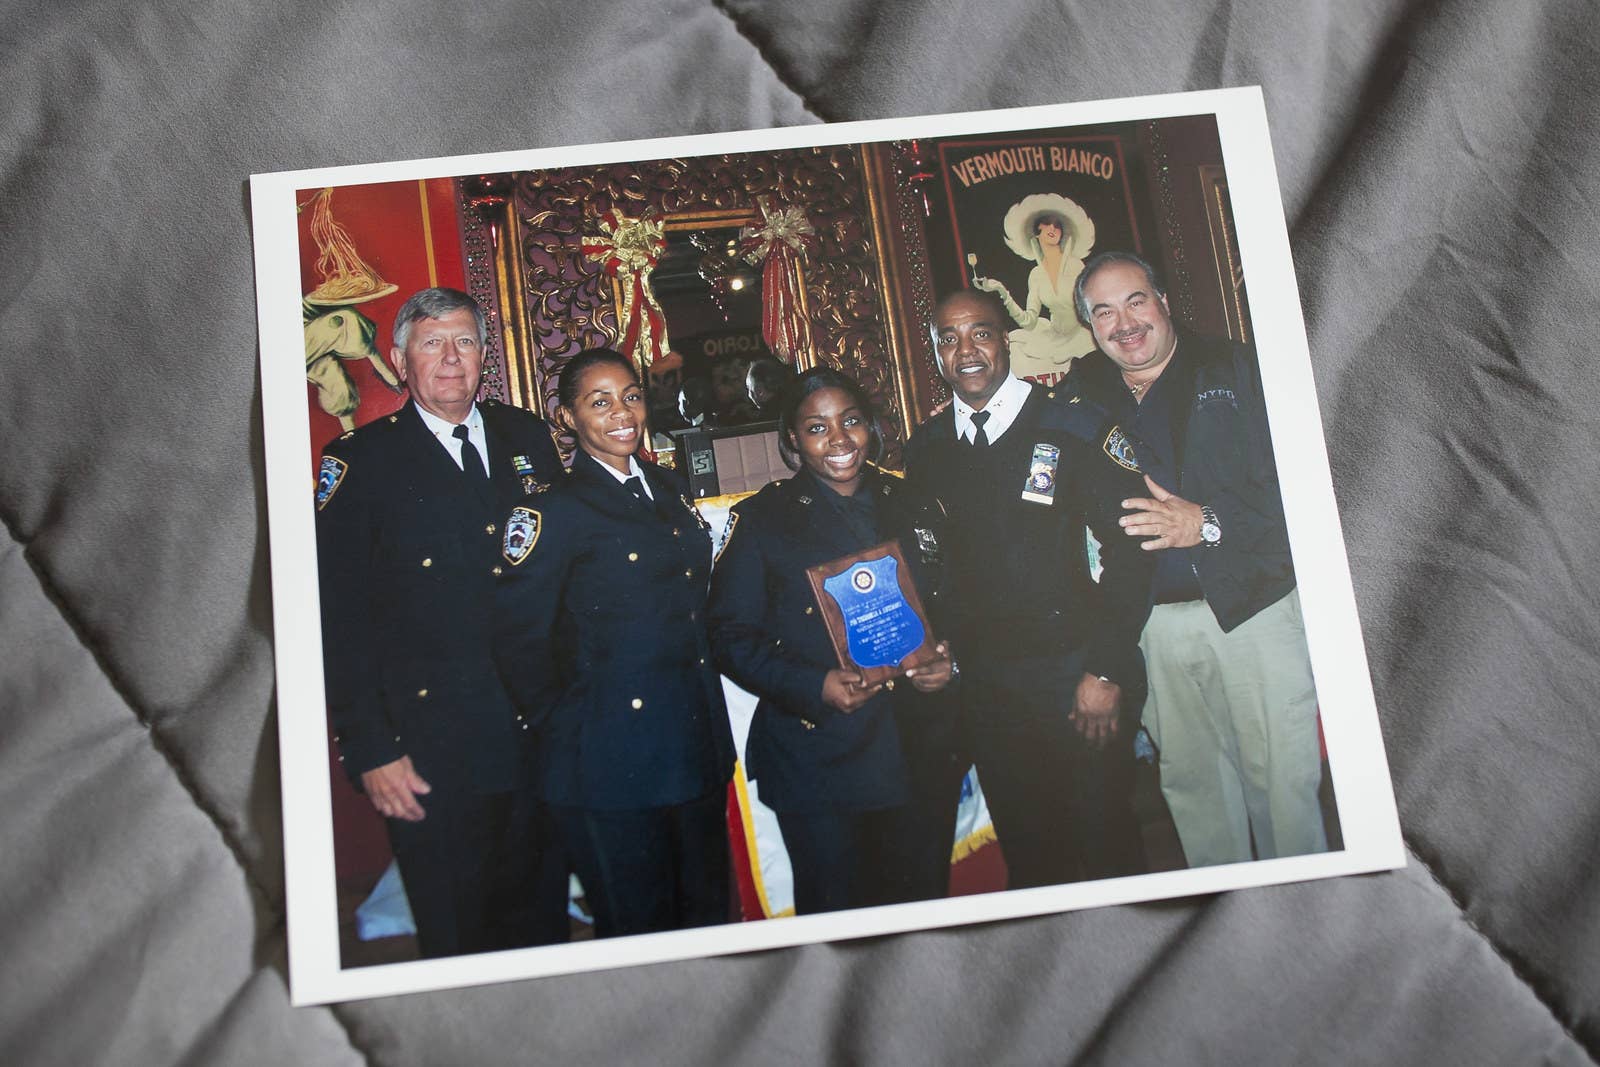 Inserillo (center) holds a plaque when she won officer of the month.